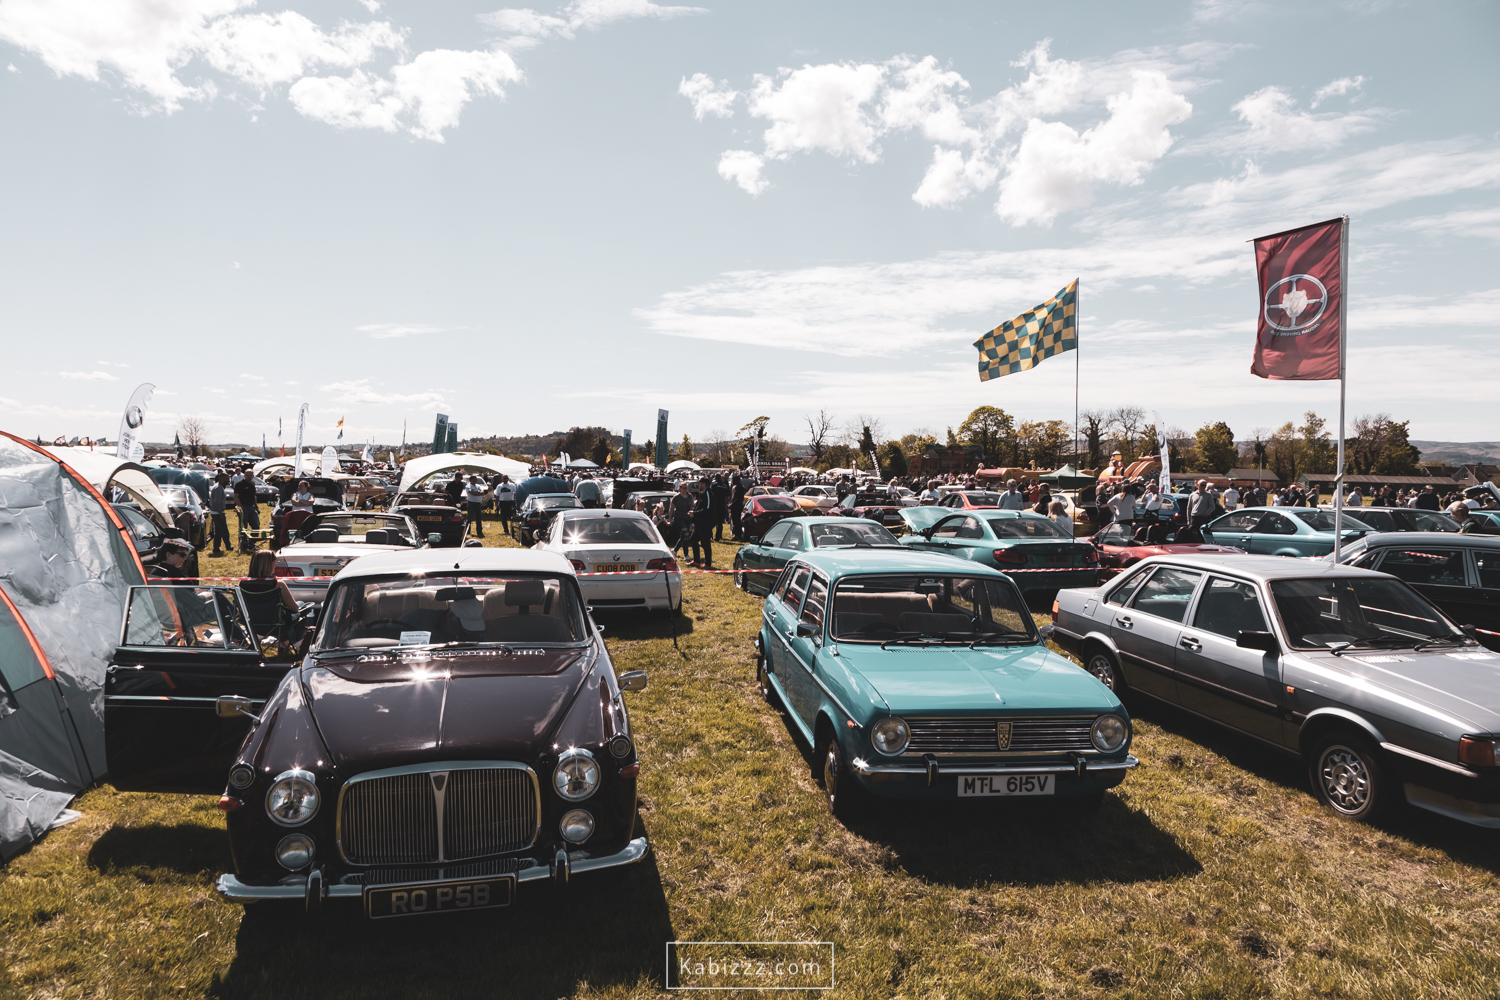 Kabizzz_Photography_Stirling_District_Classic _cars-135.jpg